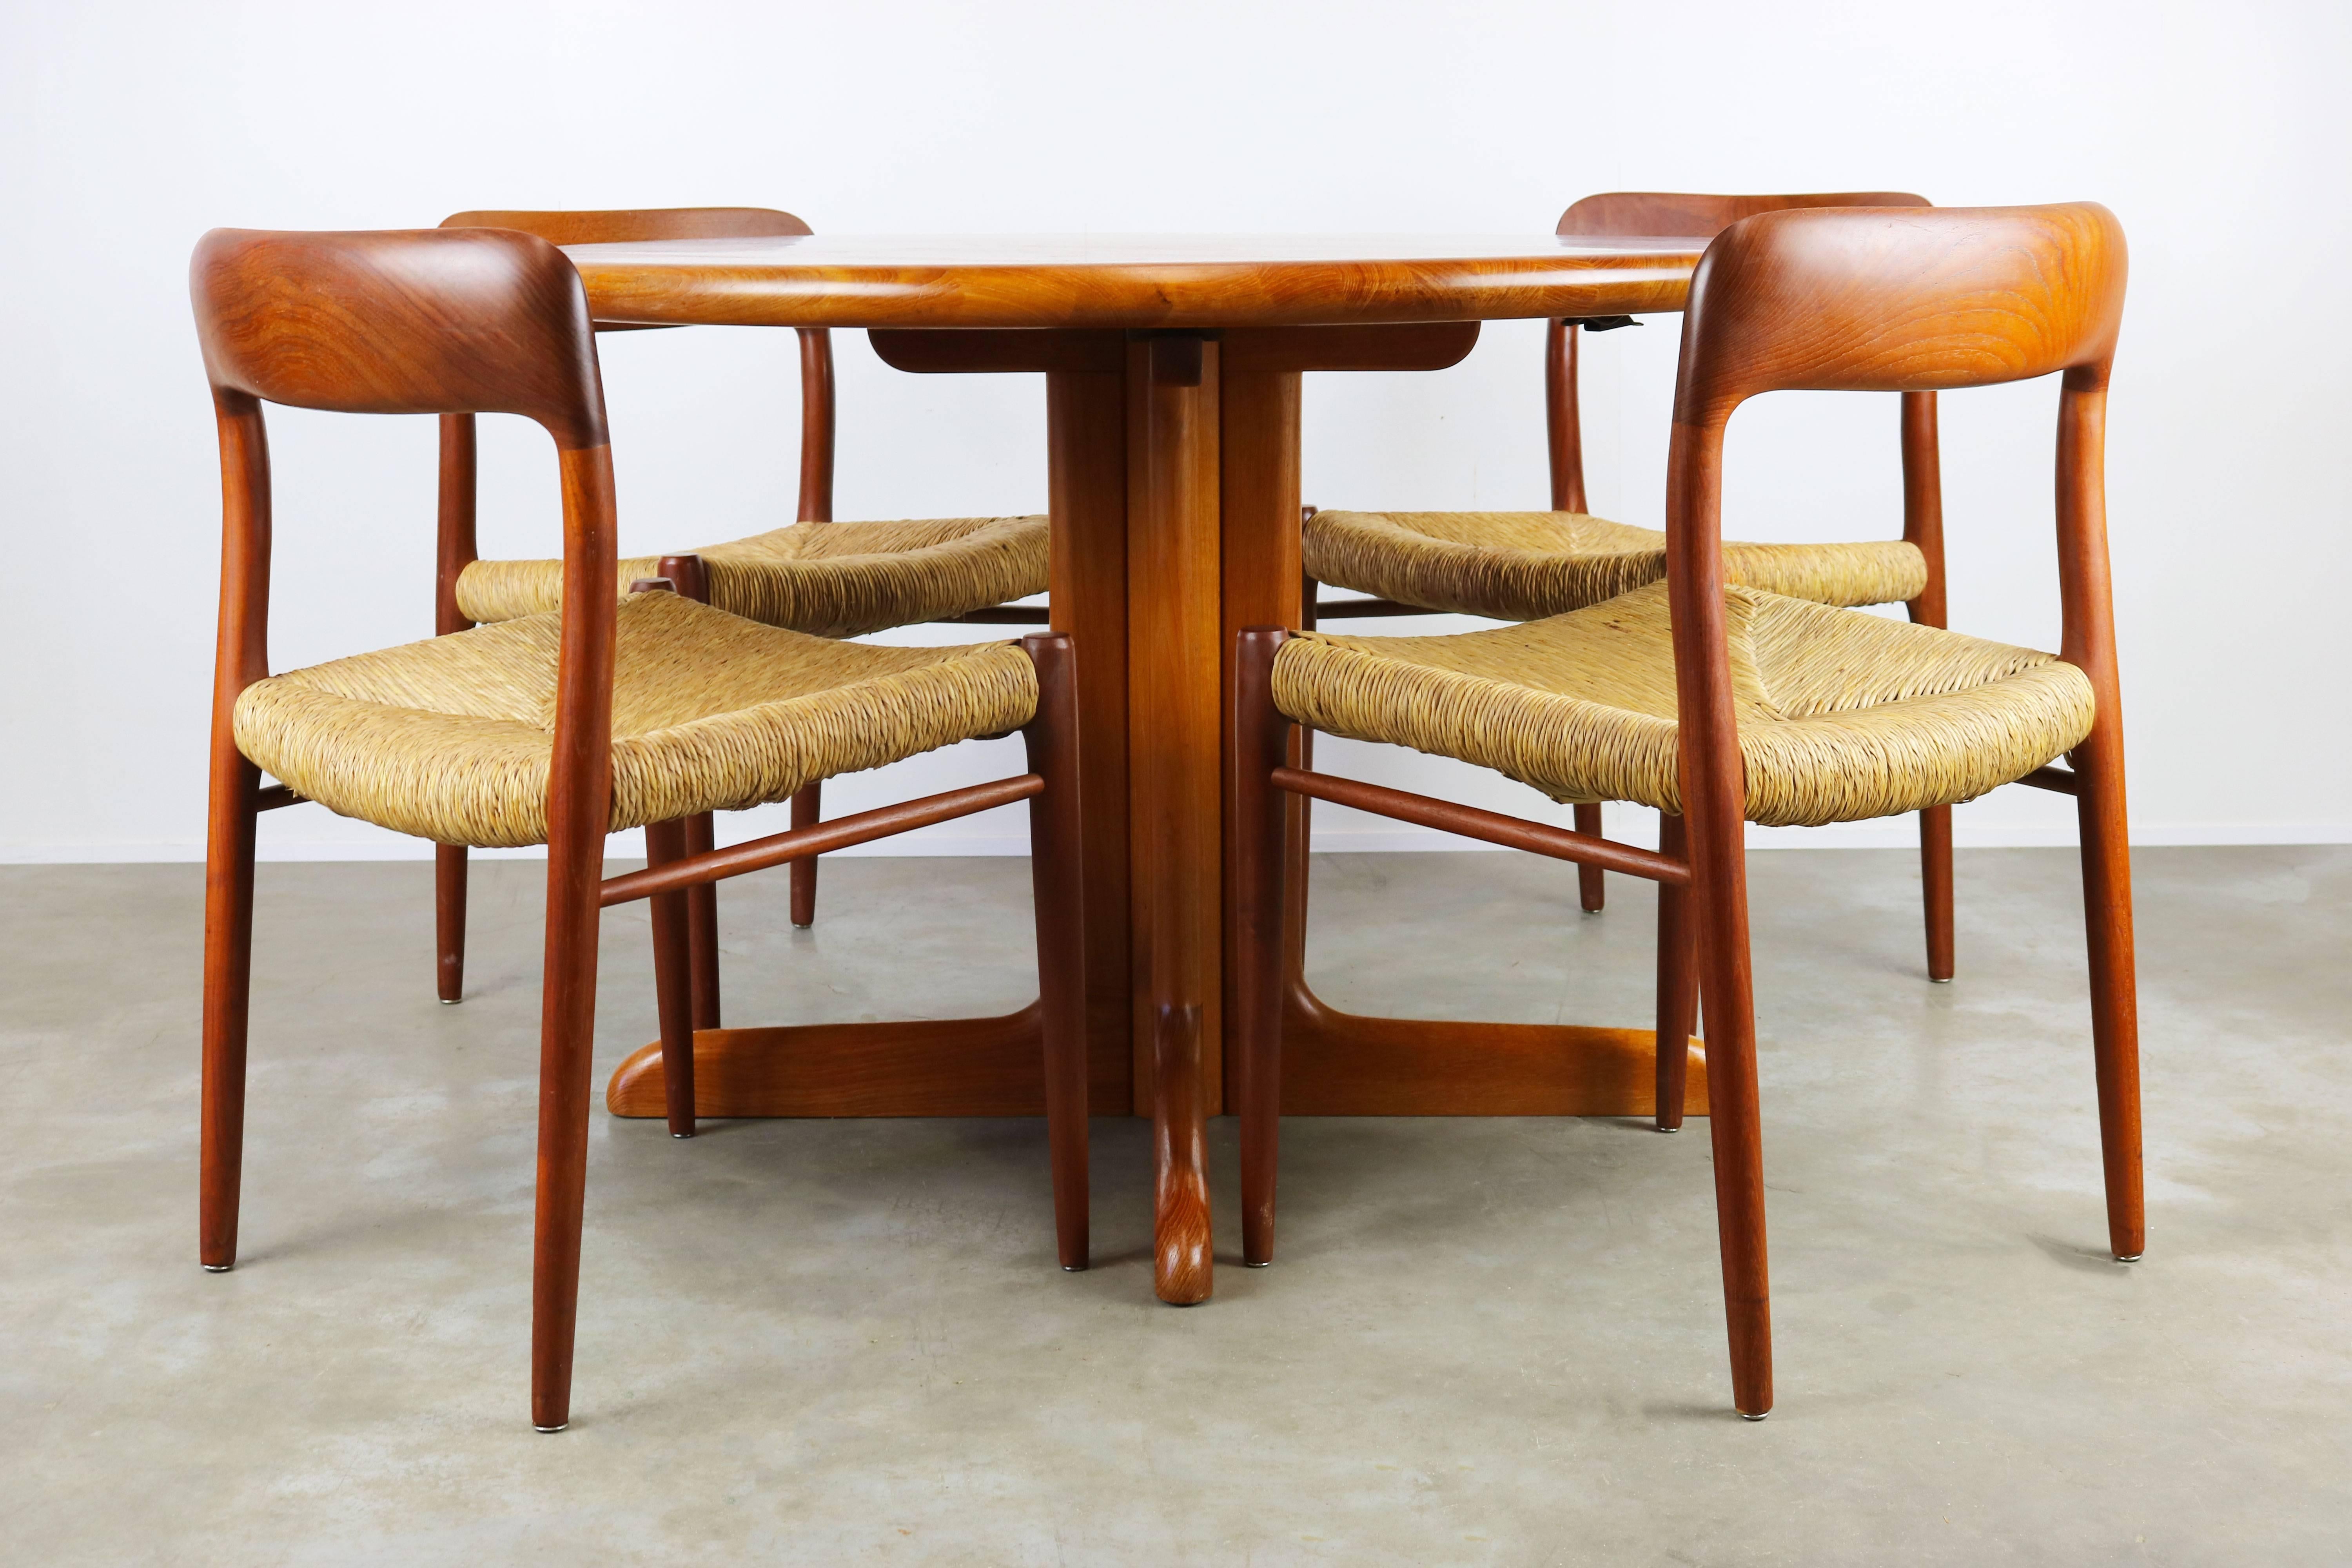 Magnificent Danish design dining room set Designed by Niels Otto Moller and produced by the J.L Mollers Mobelfabrik in the 1950s. The set consists of four solid teak model 75 chairs with handwoven rare Rattan seats and a matching round solid teak